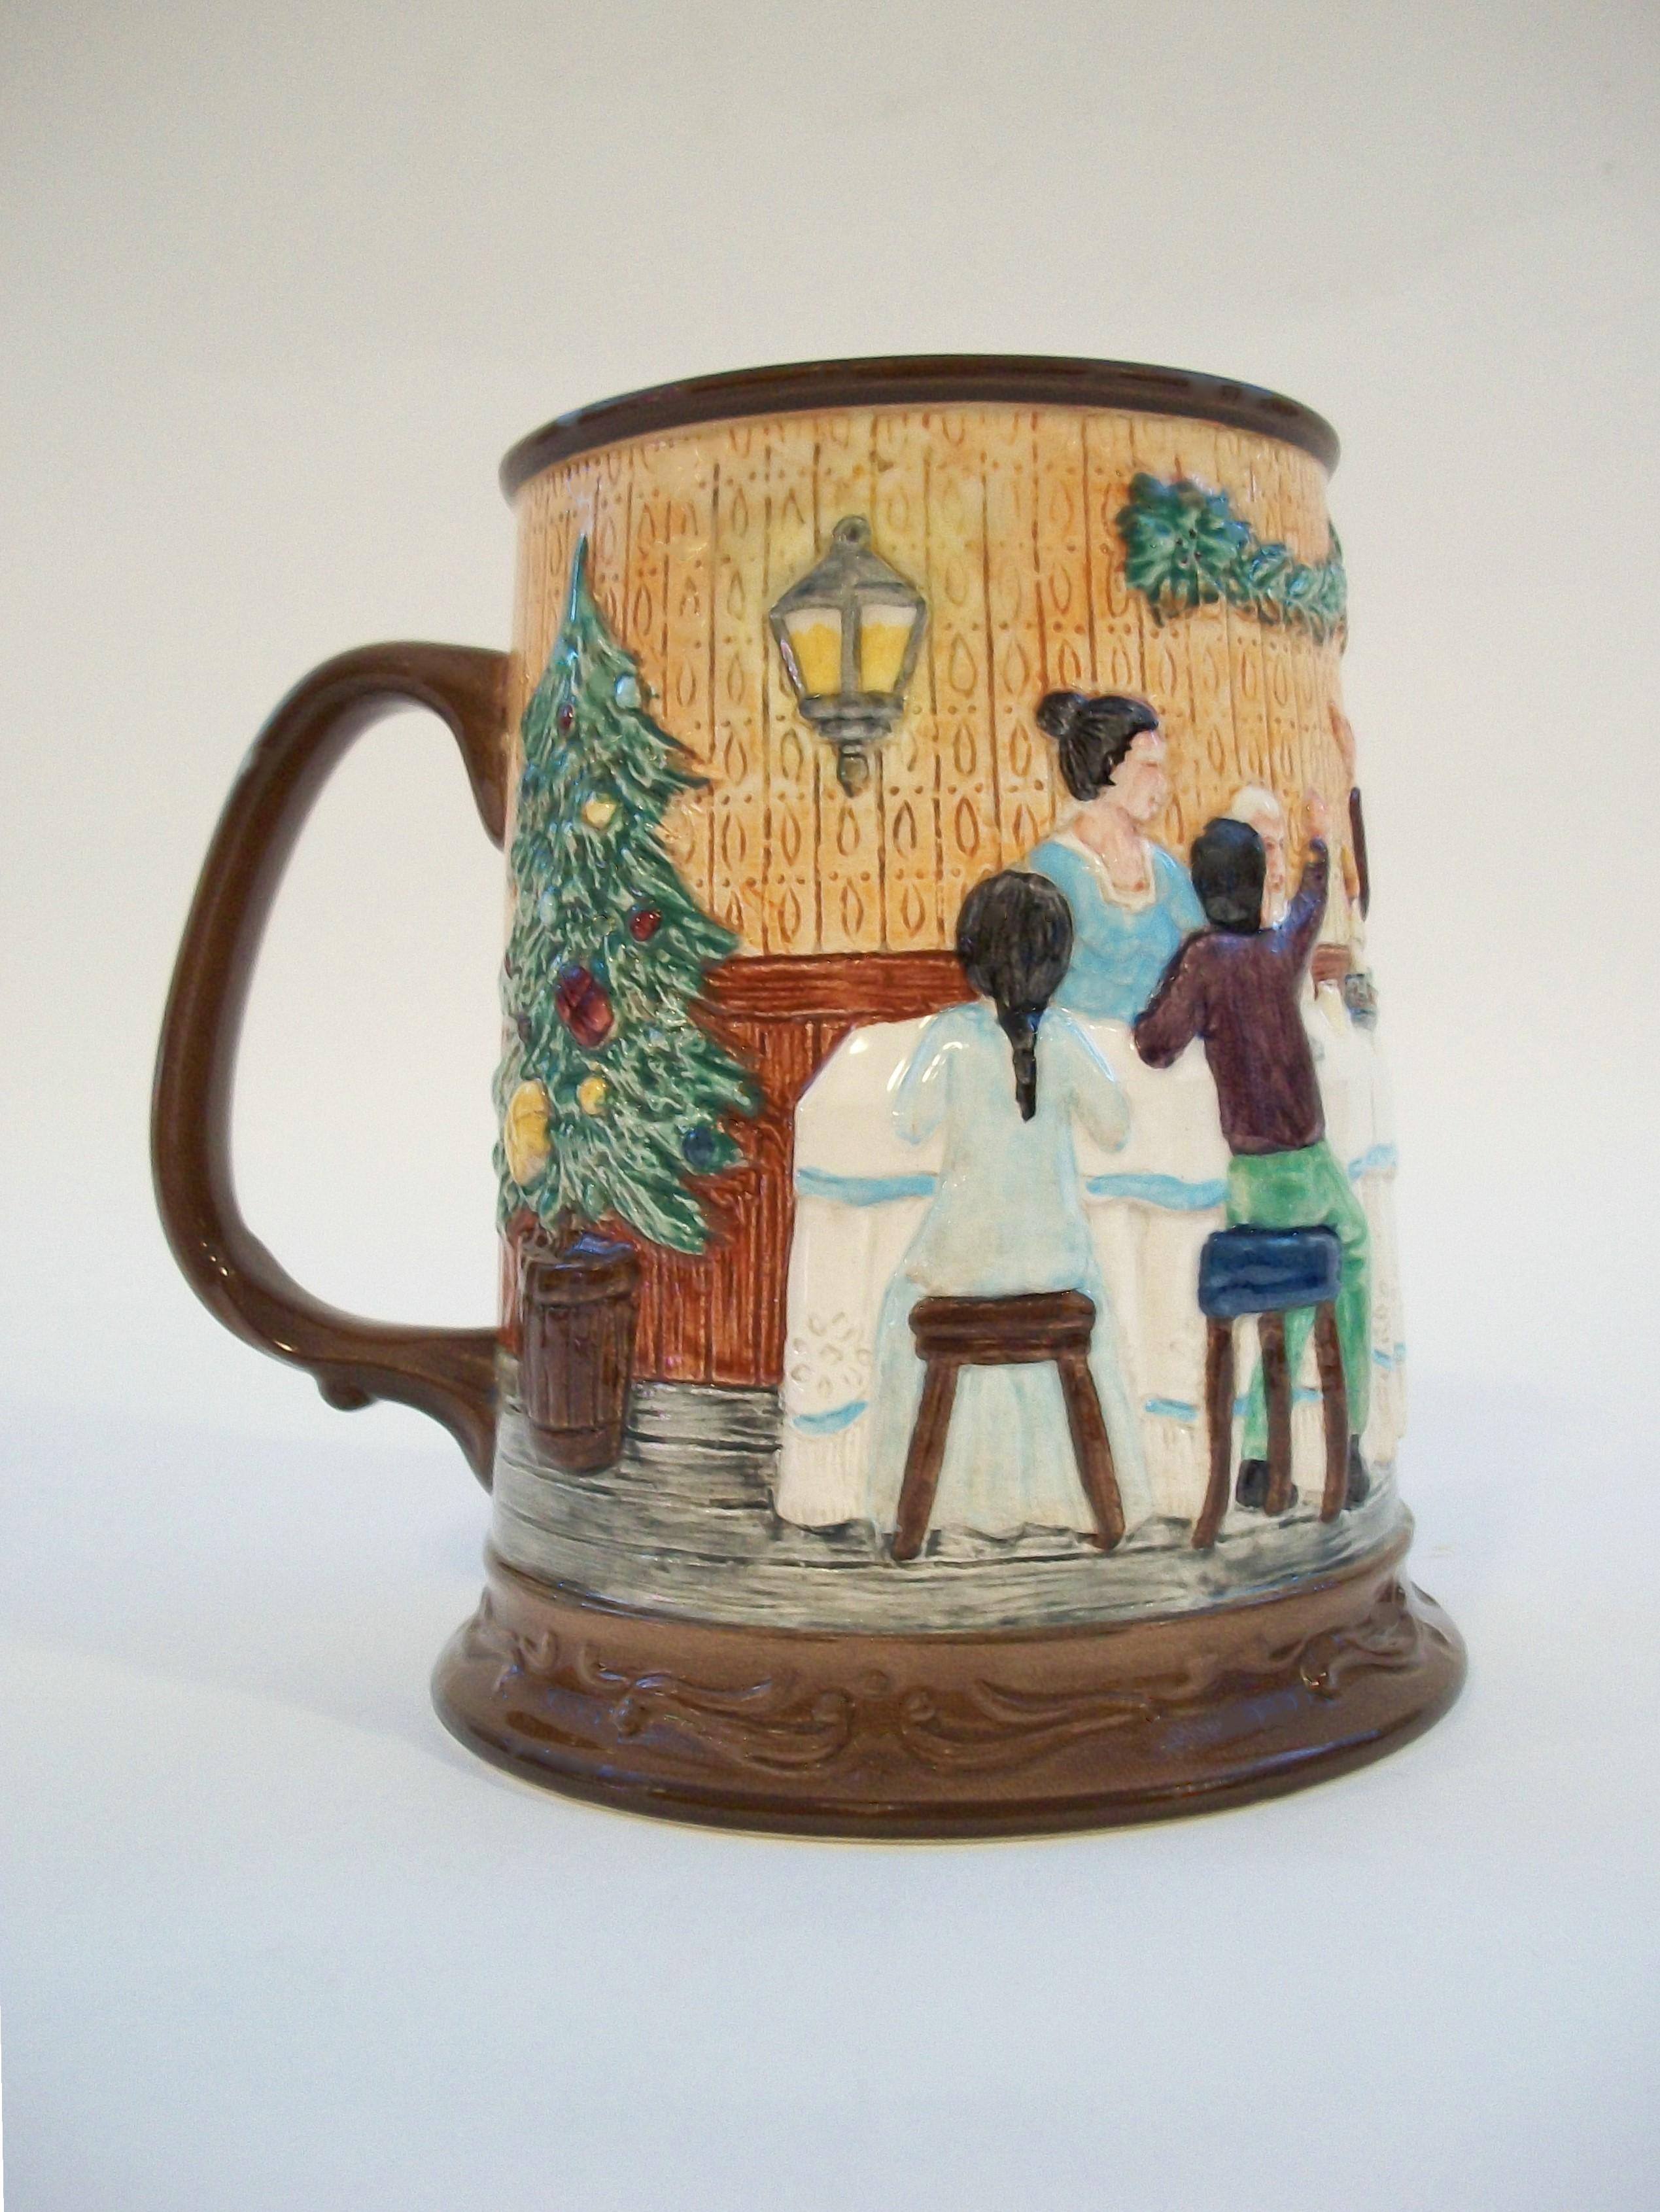 JOHN BESWICK LIMITED (Manufacturer) - The Christmas Carol, Charles Dickens (Pattern) - Collectors International Limited Edition 617/15,000 - Vintage ceramic Christmas mug - featuring hand painted decoration over the mold formed body - signed on the